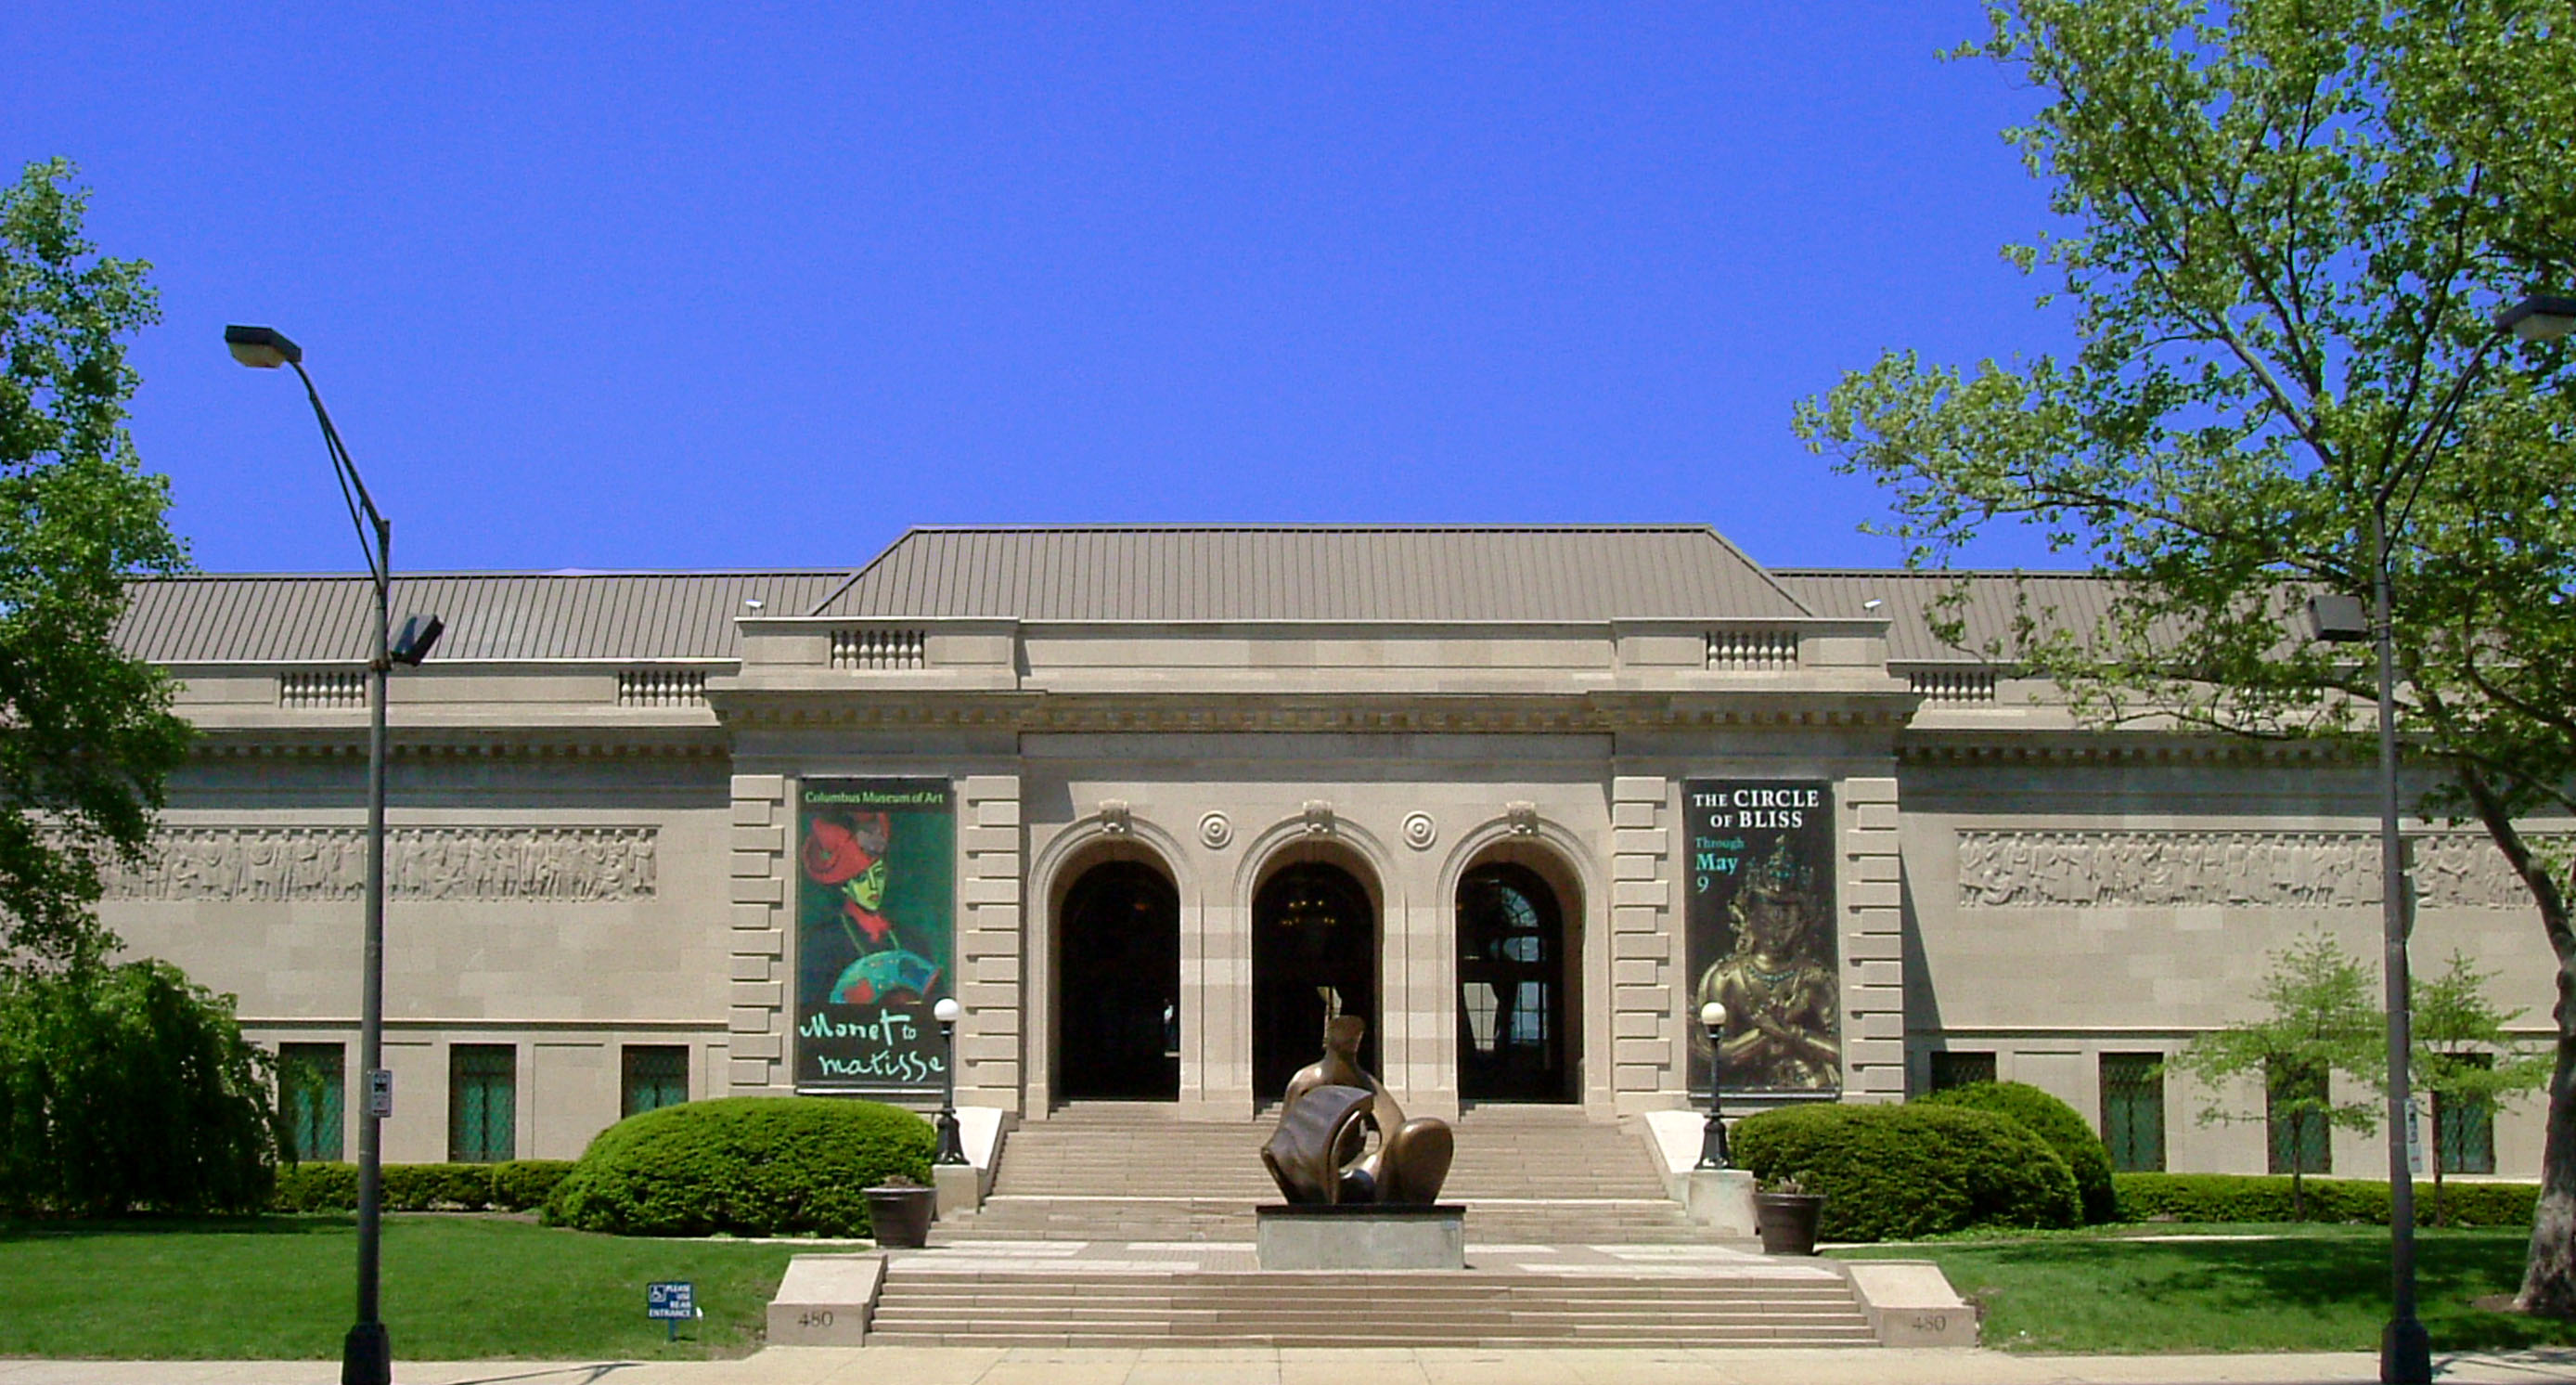 Discover Columbus Museums for All: Accessible and Affordable Fun for Families